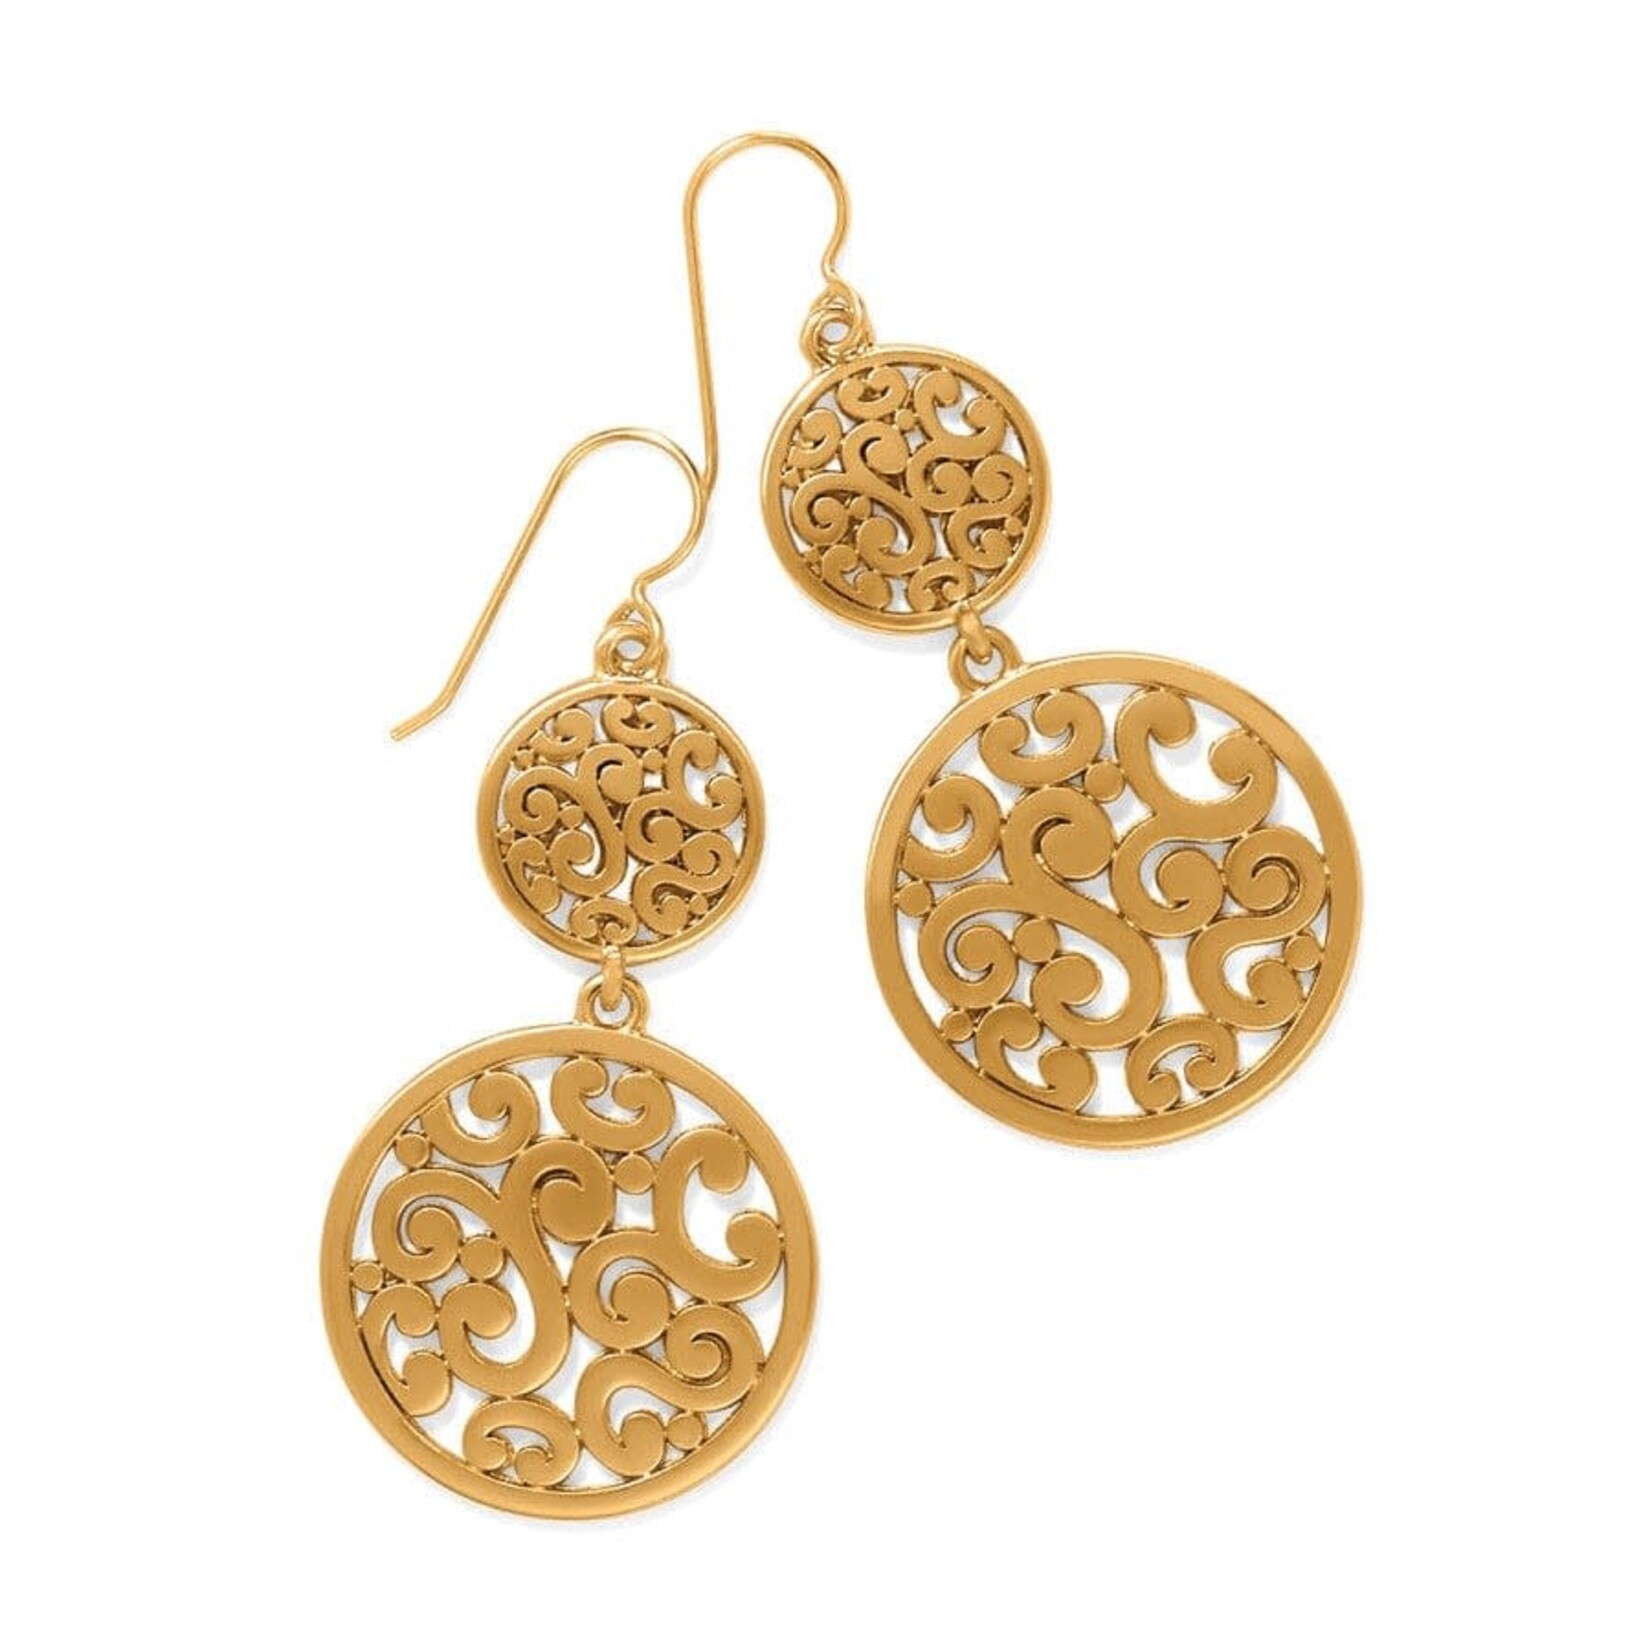 Brighton JA9904 Contempo Medallion Duo French Wire Earrings - Gold